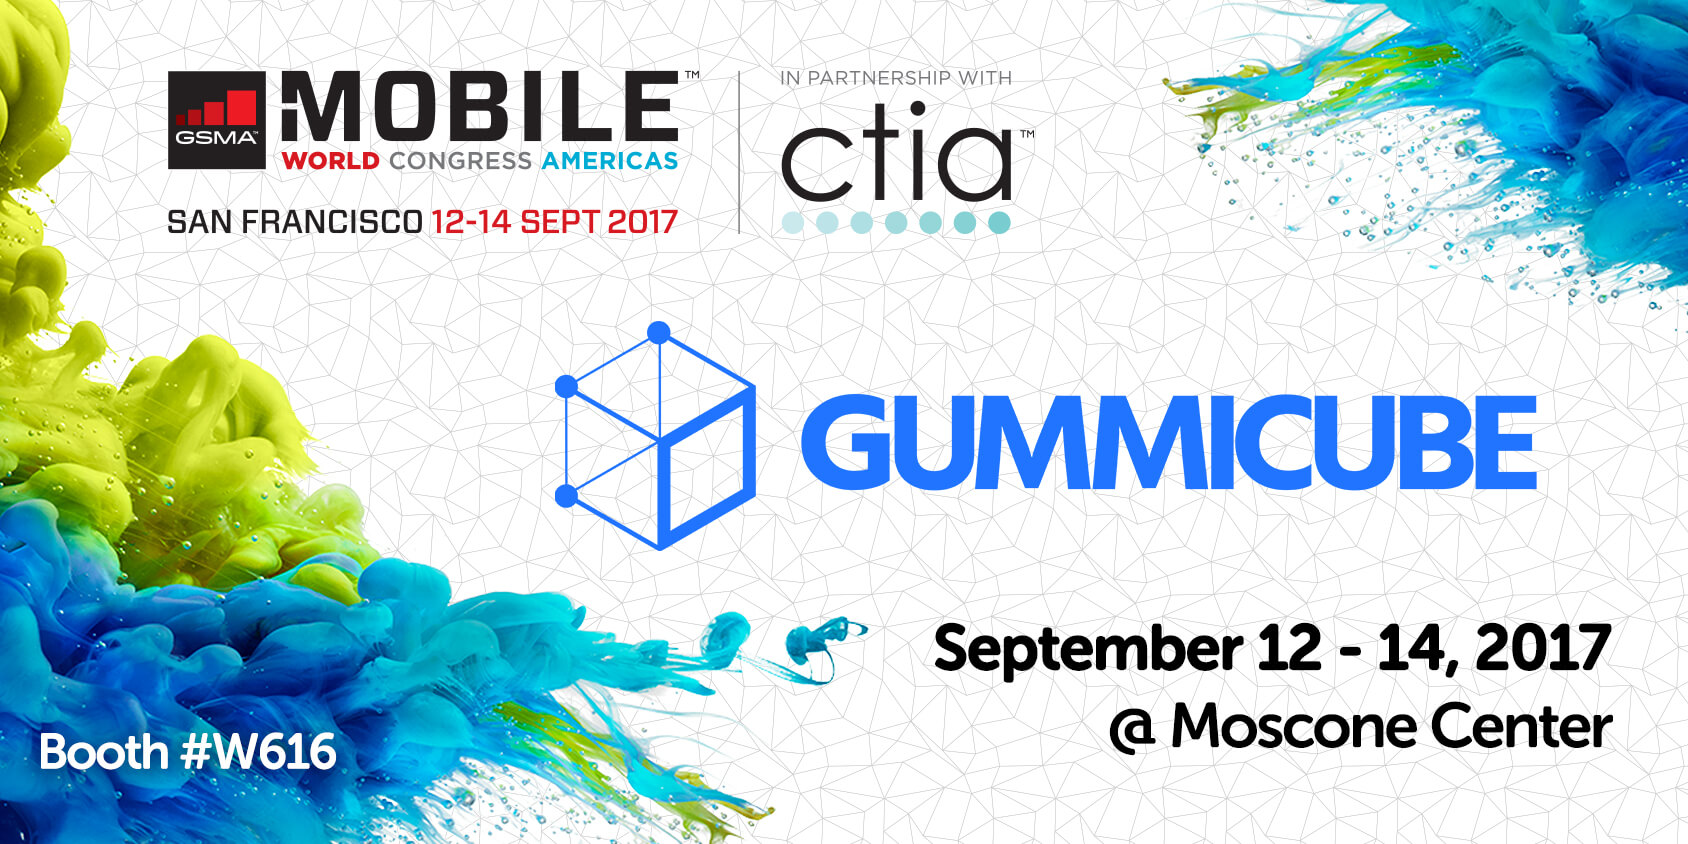 Gummicube is Attending Mobile World Congress Americas in San Francisco, CA